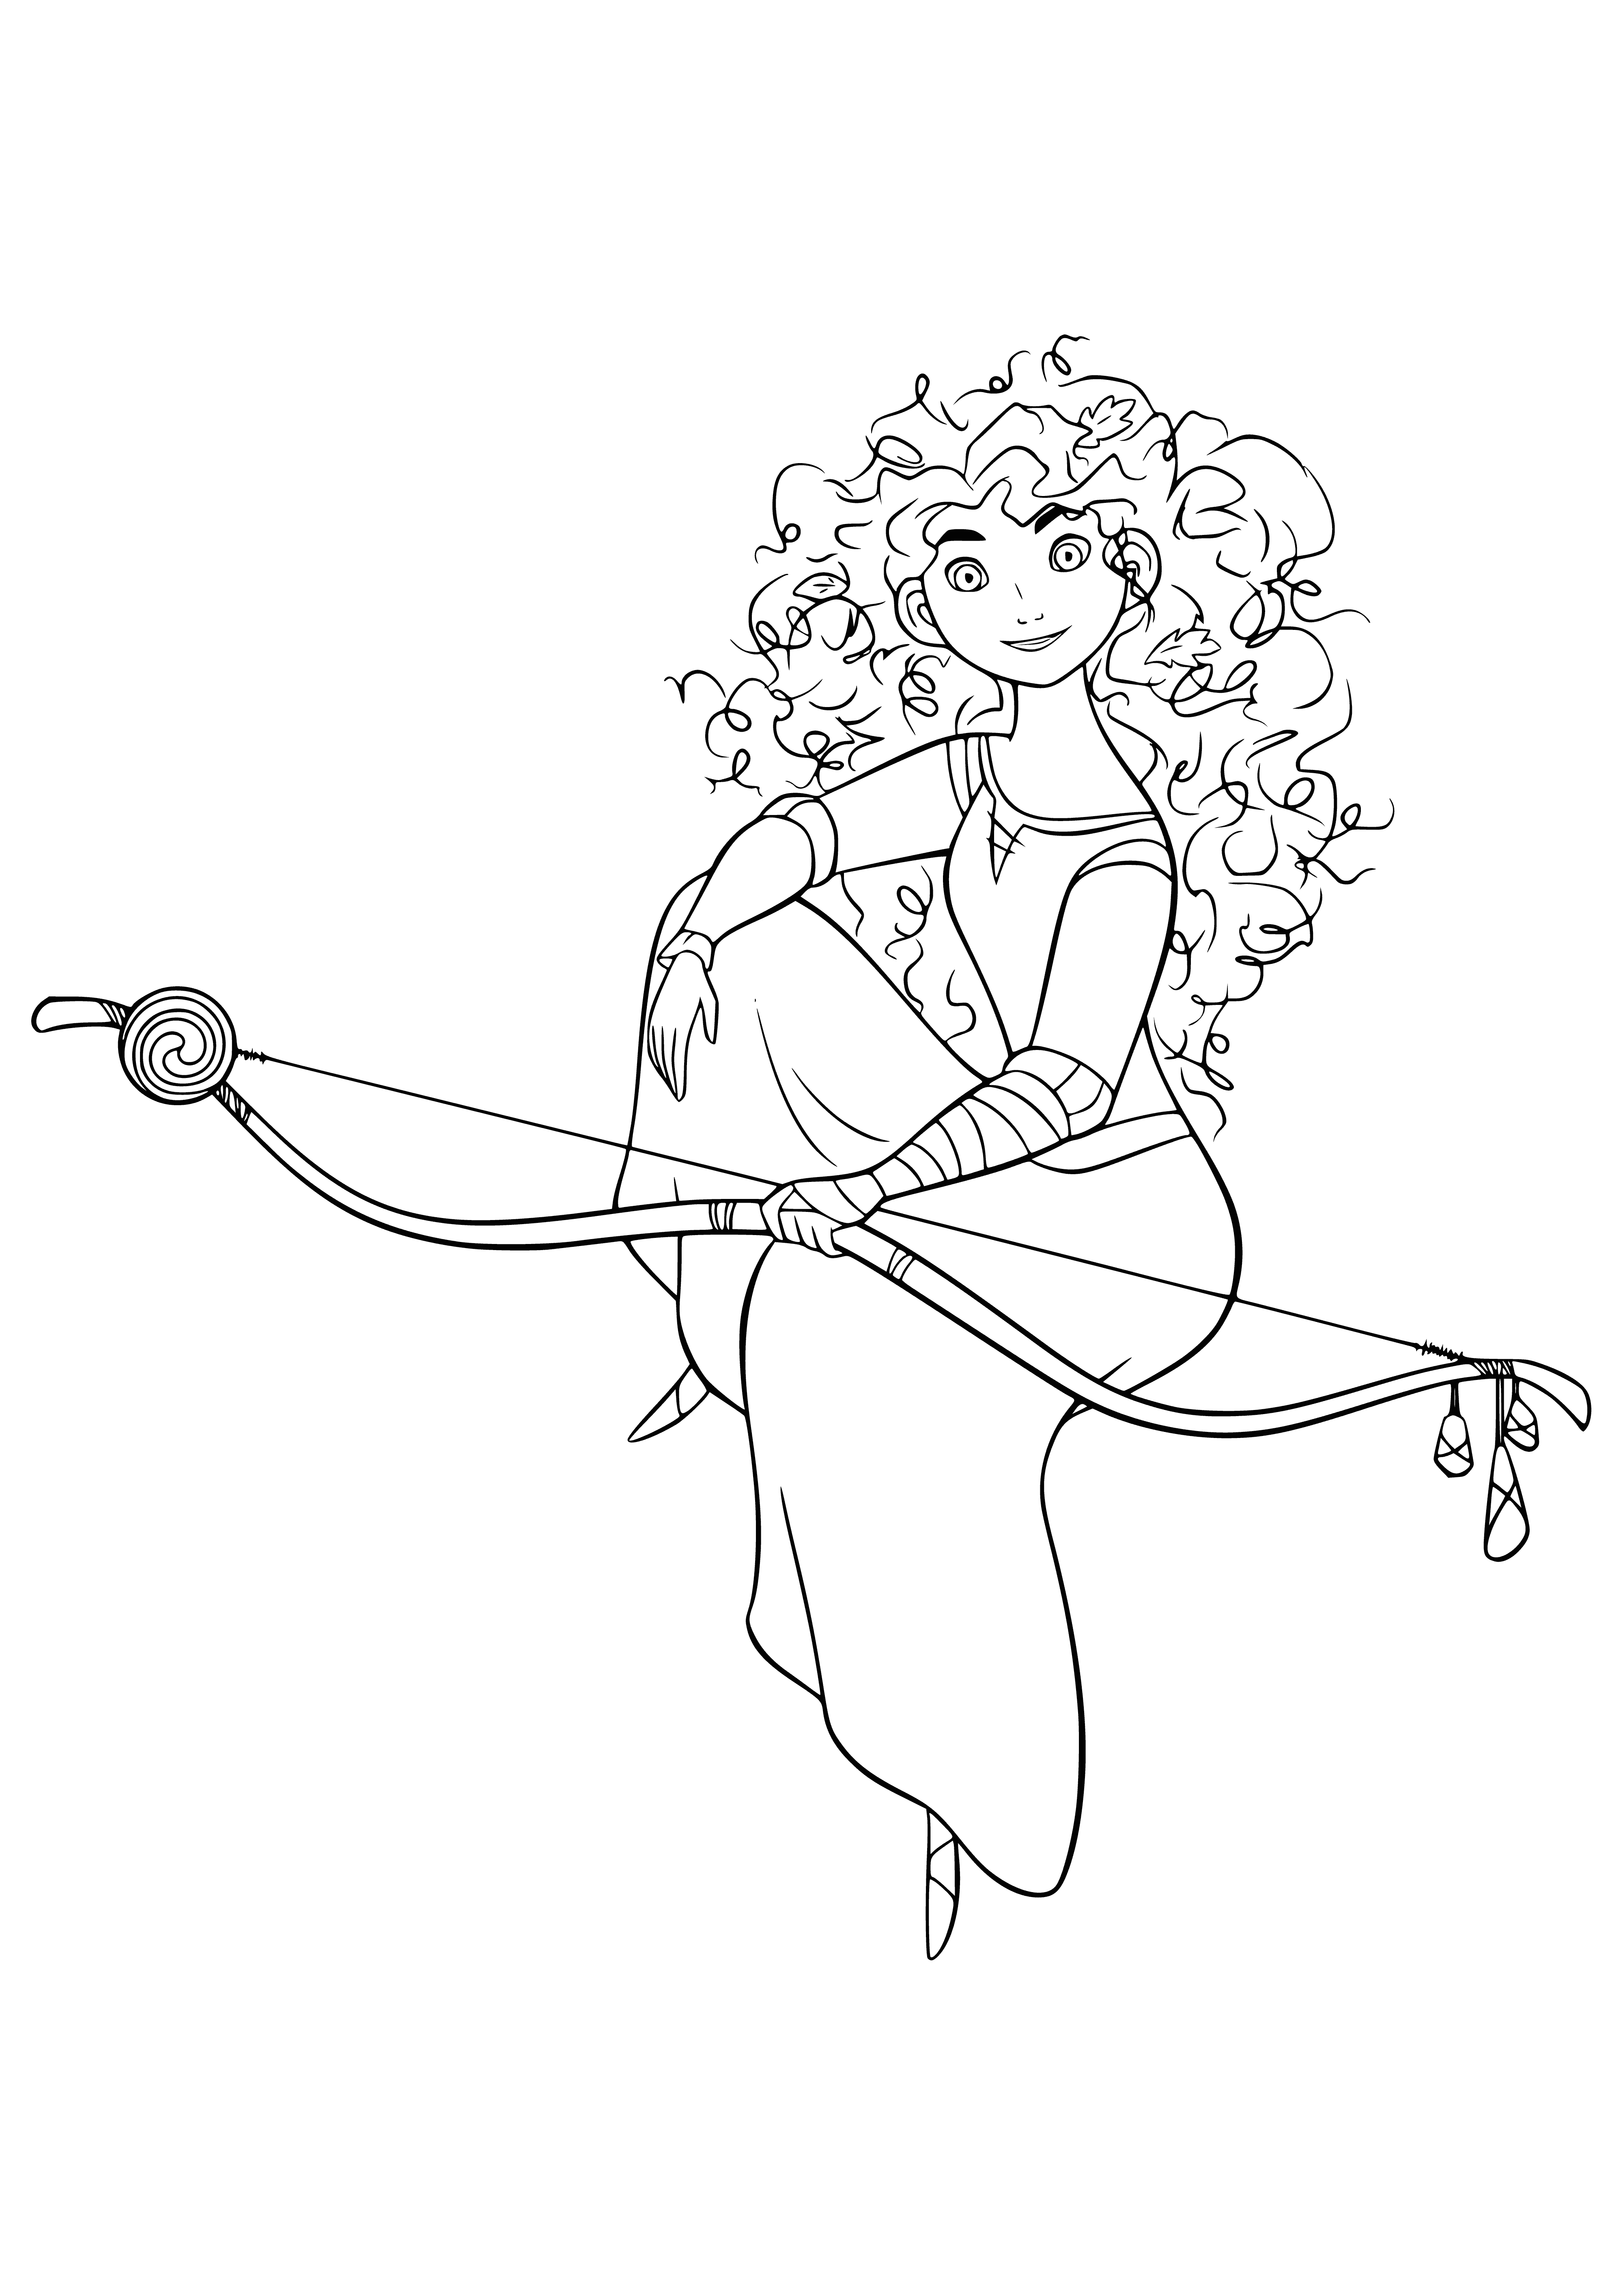 coloring page: Princess Merida is a brave, wild spirit - ready for anything with her longbow and quiver of arrows!